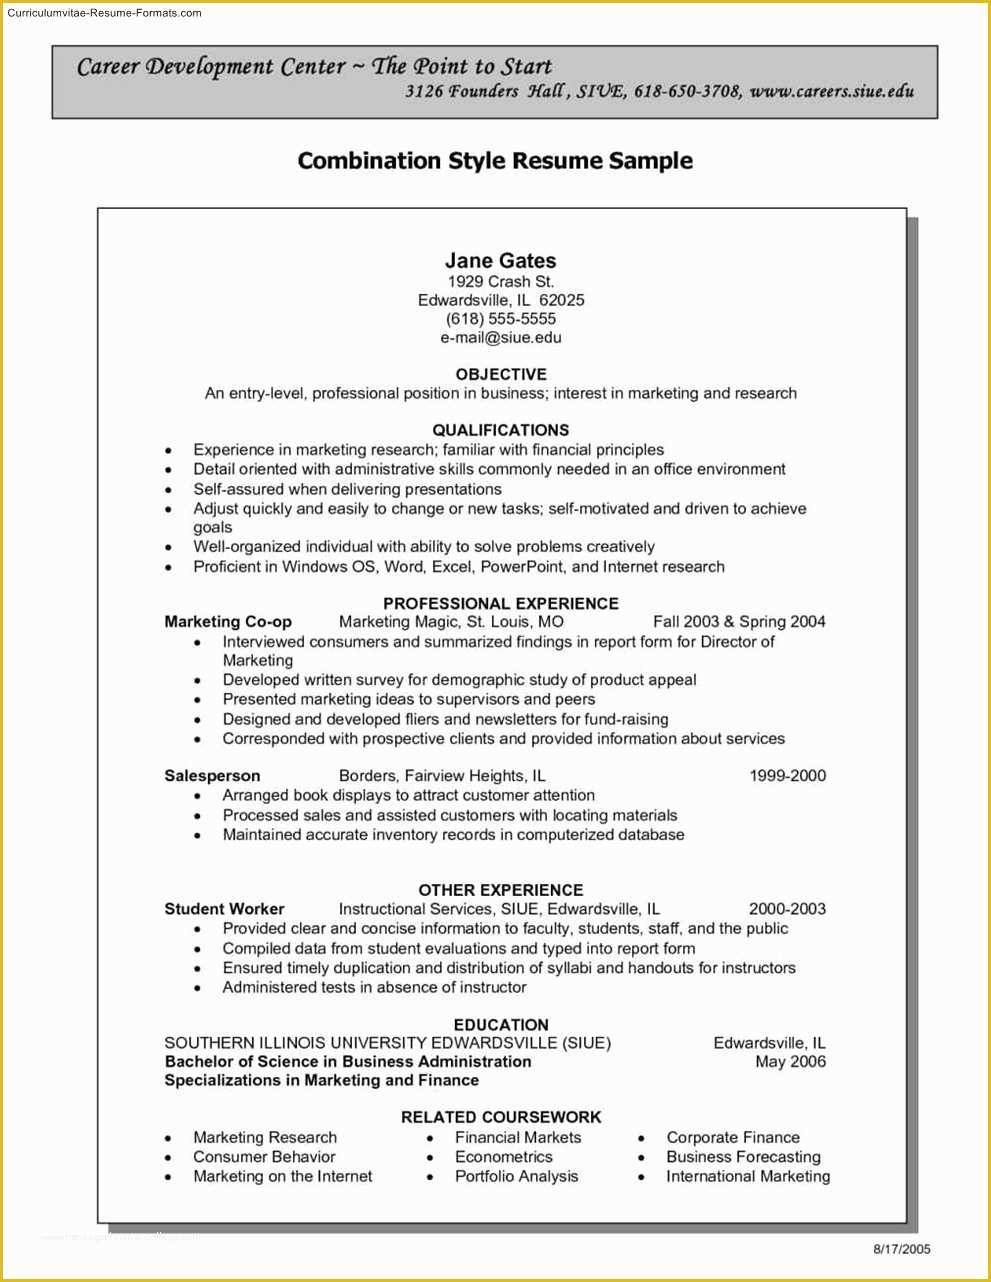 Free Combination Resume Template Word Of Bination Resume Template Word Free Samples Examples